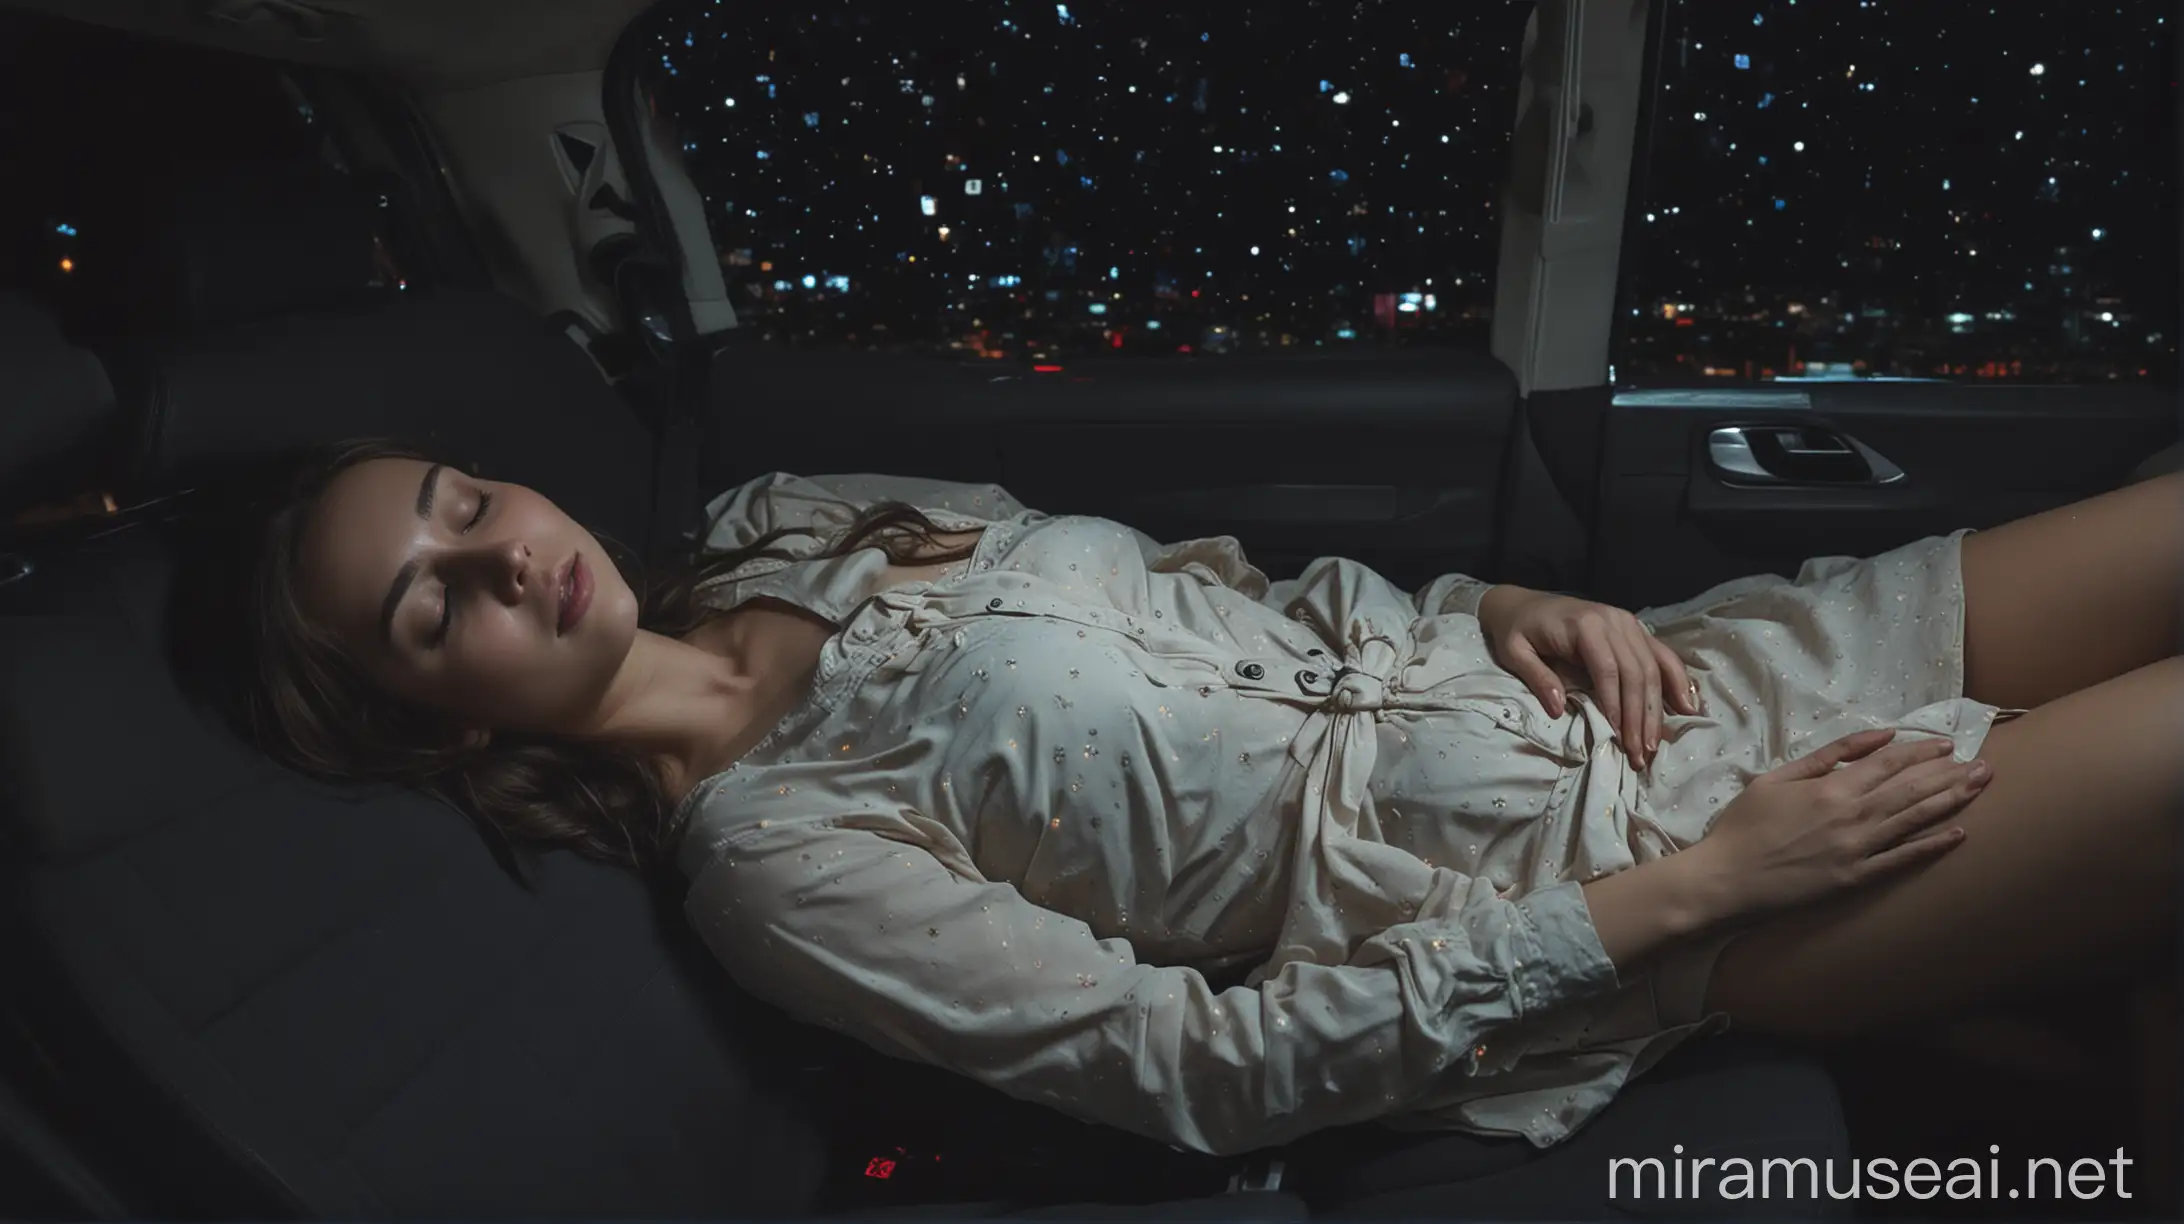 Peaceful Woman Sleeping Soundly in Car at Night